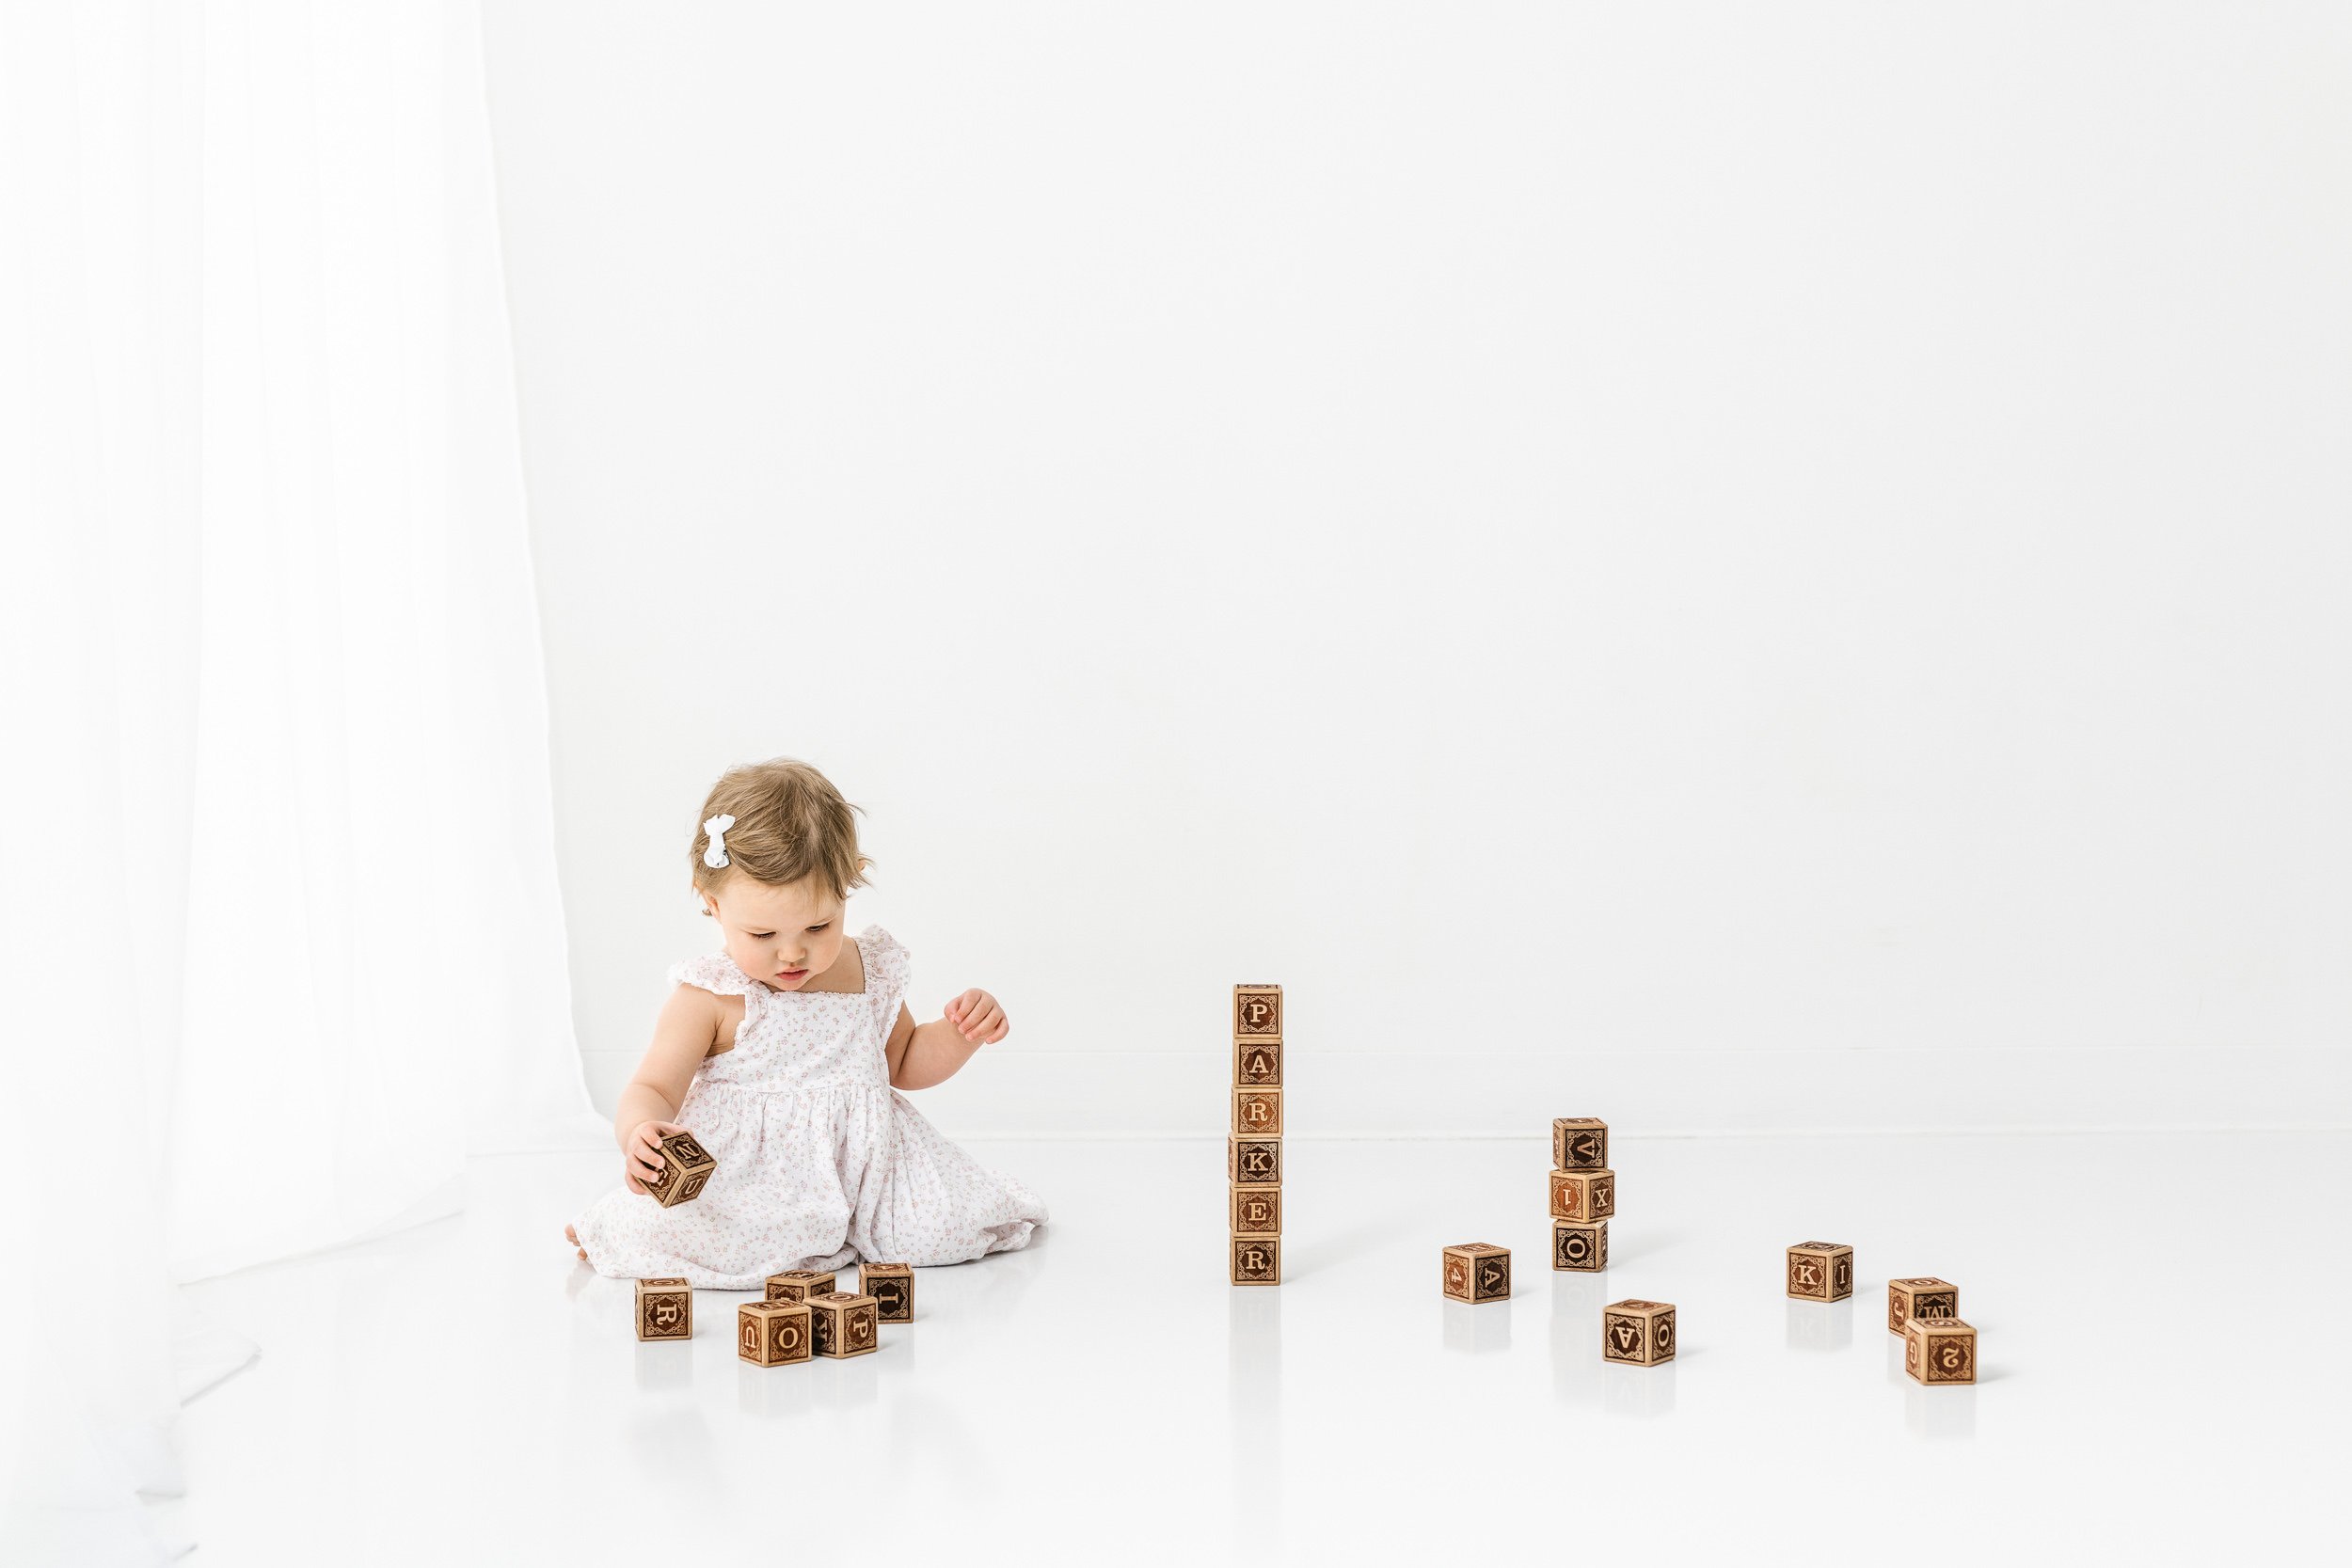  During a first birthday session, a little girl stacks wooden blocks by Nicole Hawkins Photography. wooden blocks photography #NicoleHawkinsPhotography #NicoleHawkinsBabies #studiochildren #firstbirthday #studiophotography #girlsbirthdayportraits 